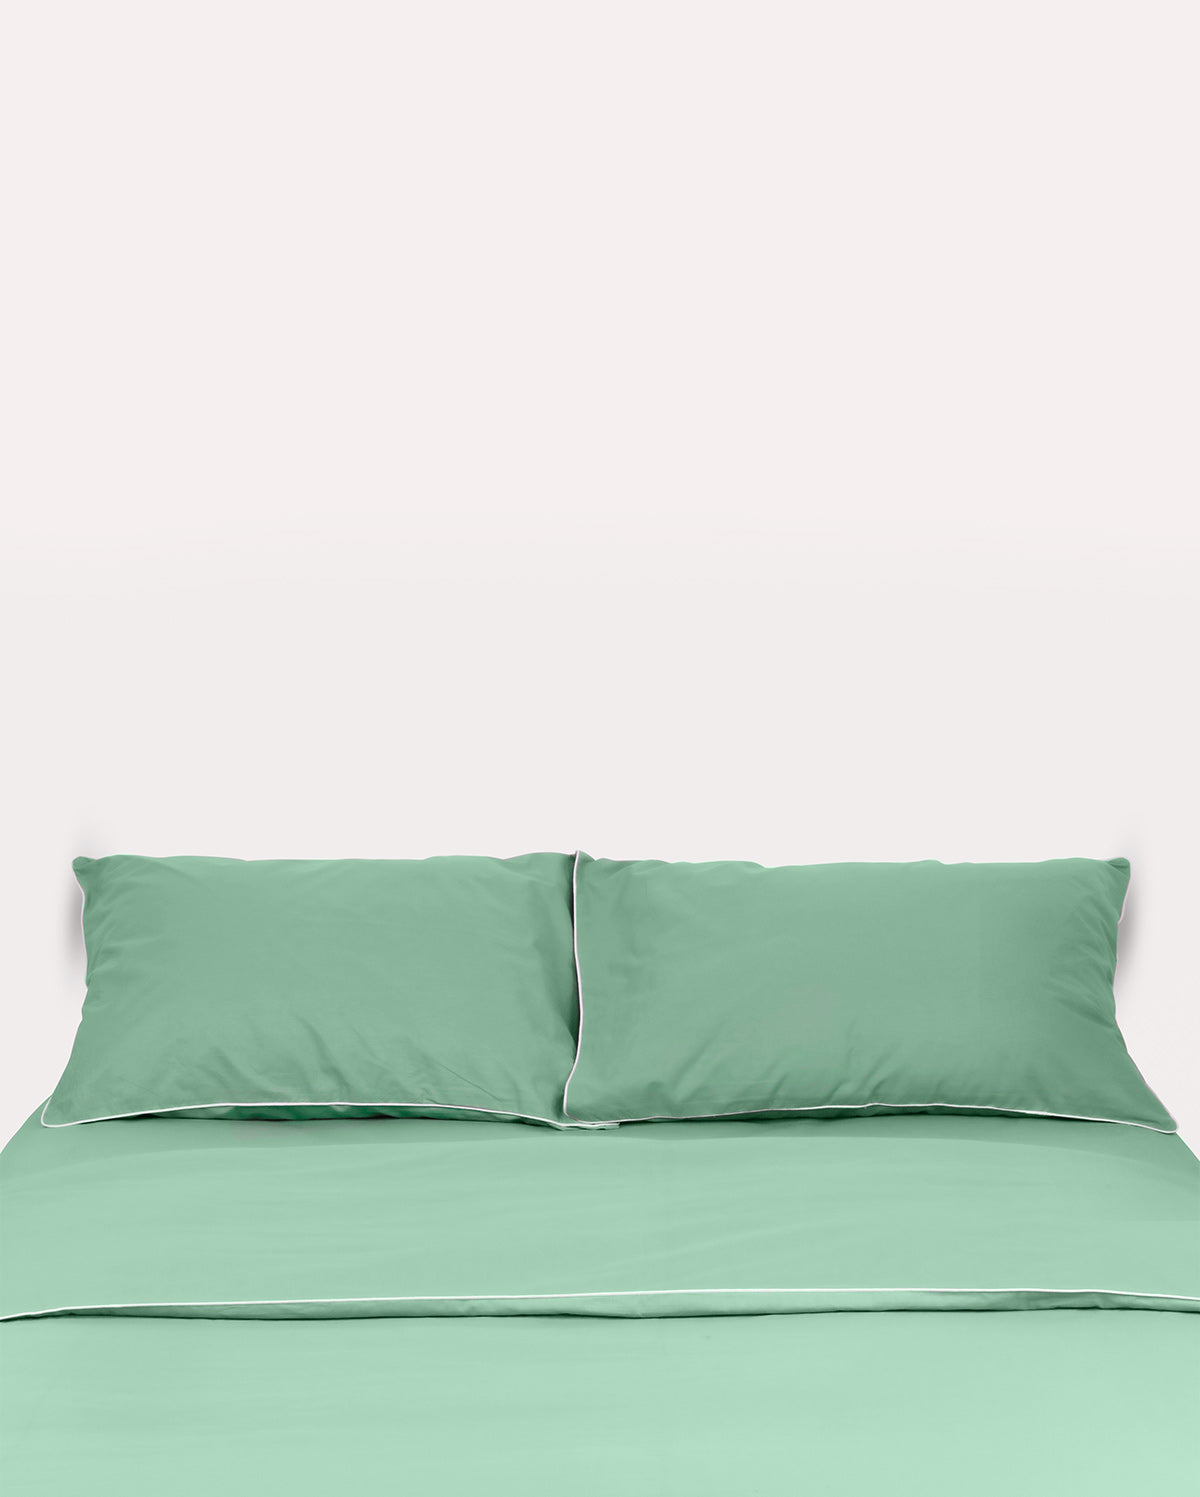 Classic Percale - Duvet Cover Set - Jade Green with White Piped Edge